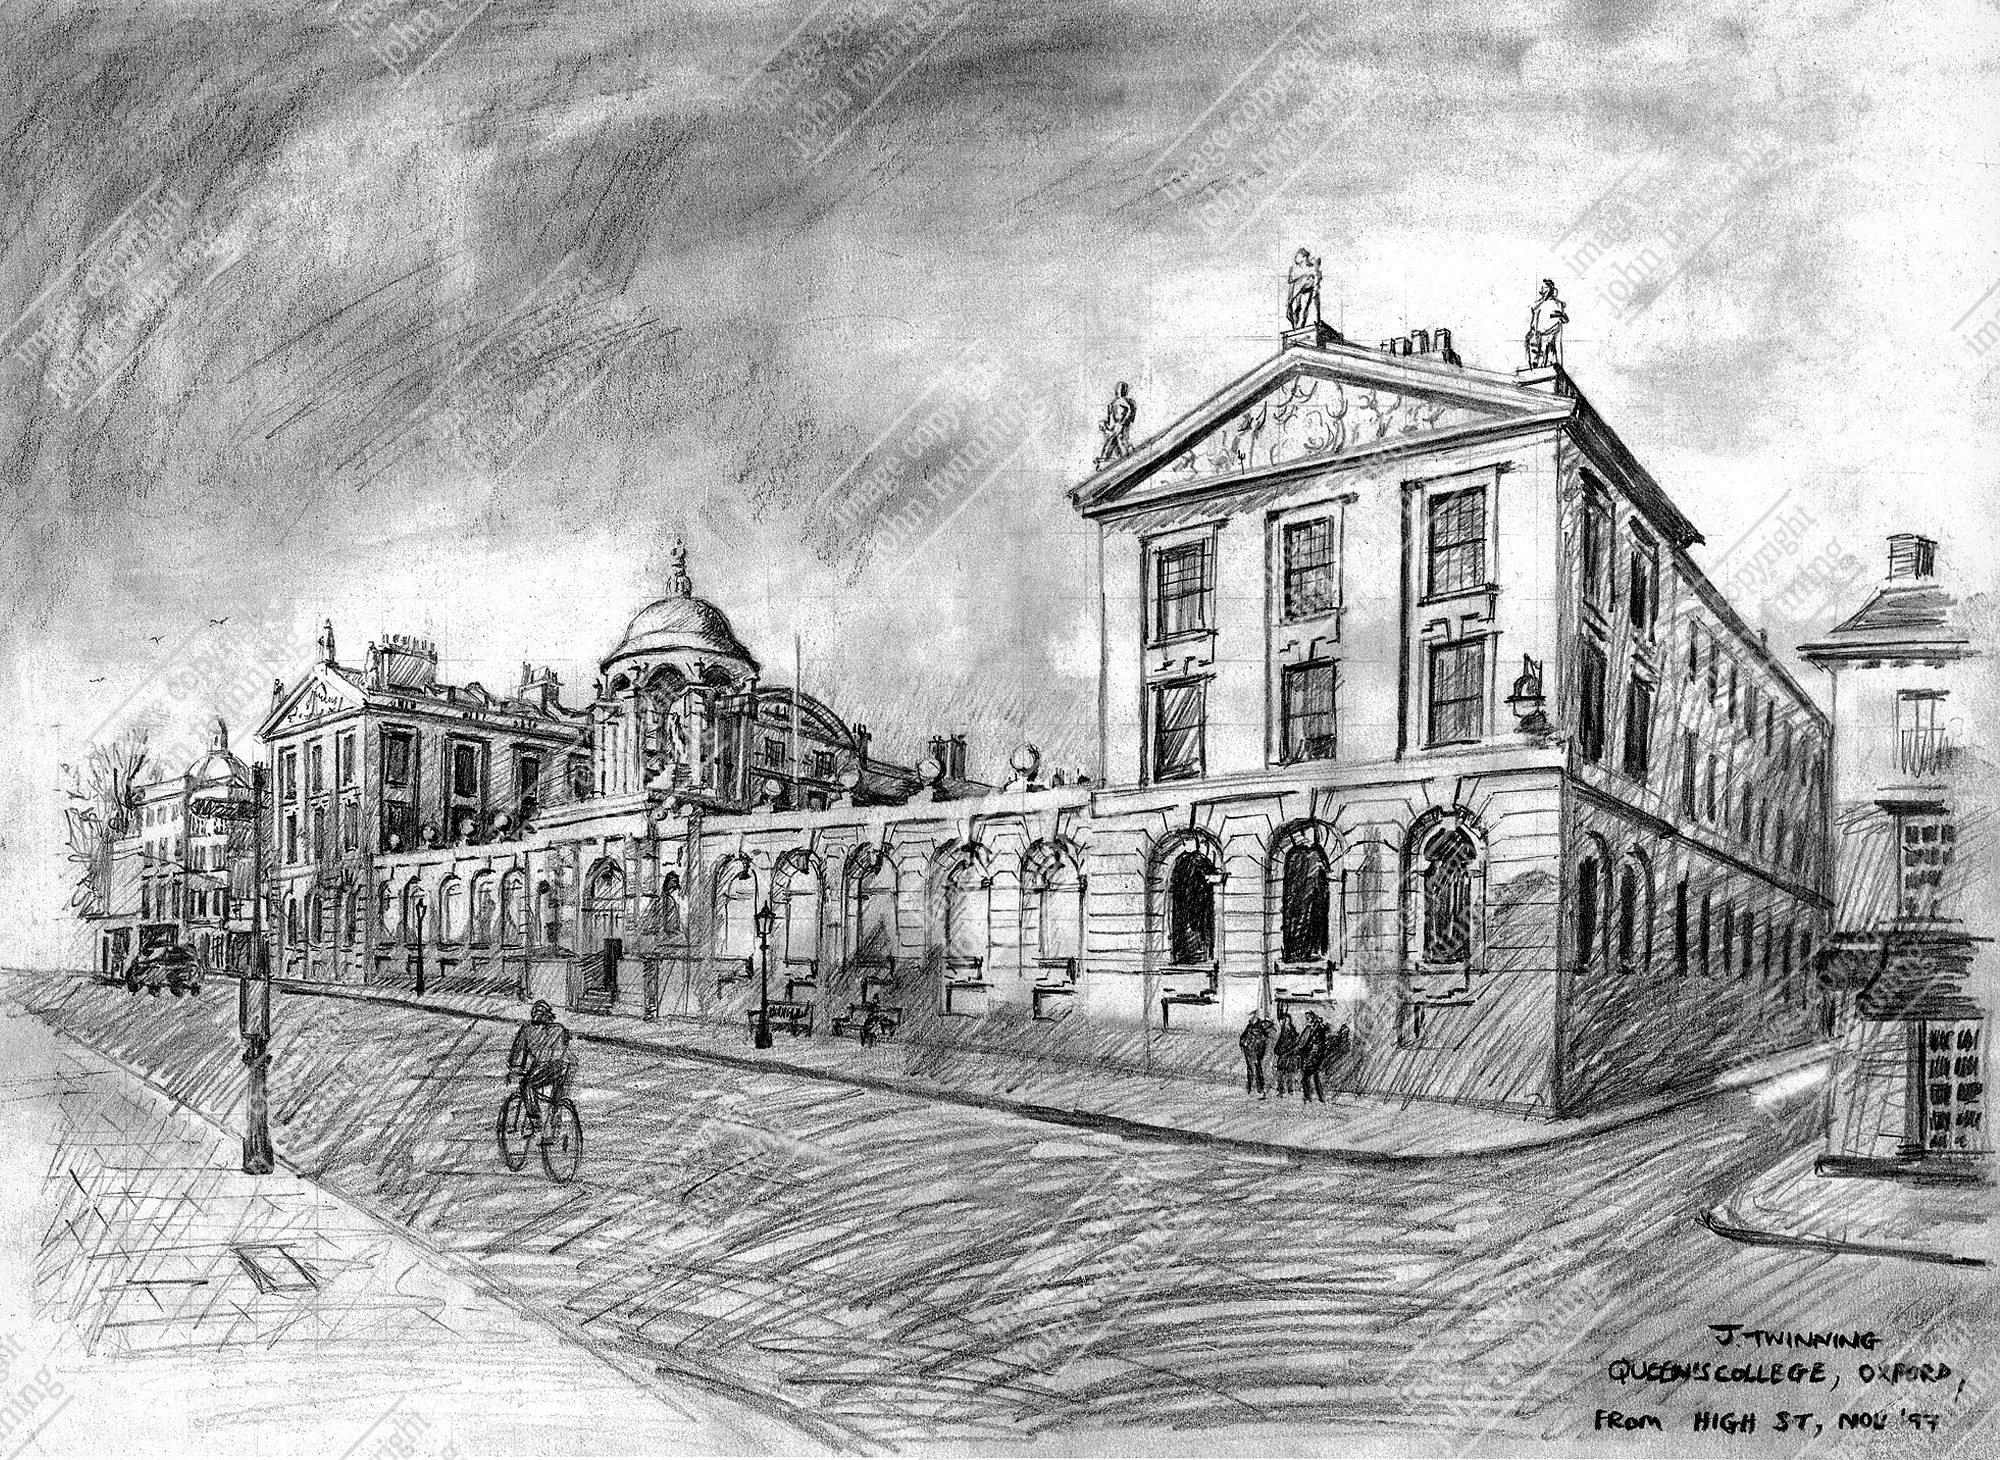 'View From The High Street' - art print from a pencil drawing of this external view of the queen's college, oxford